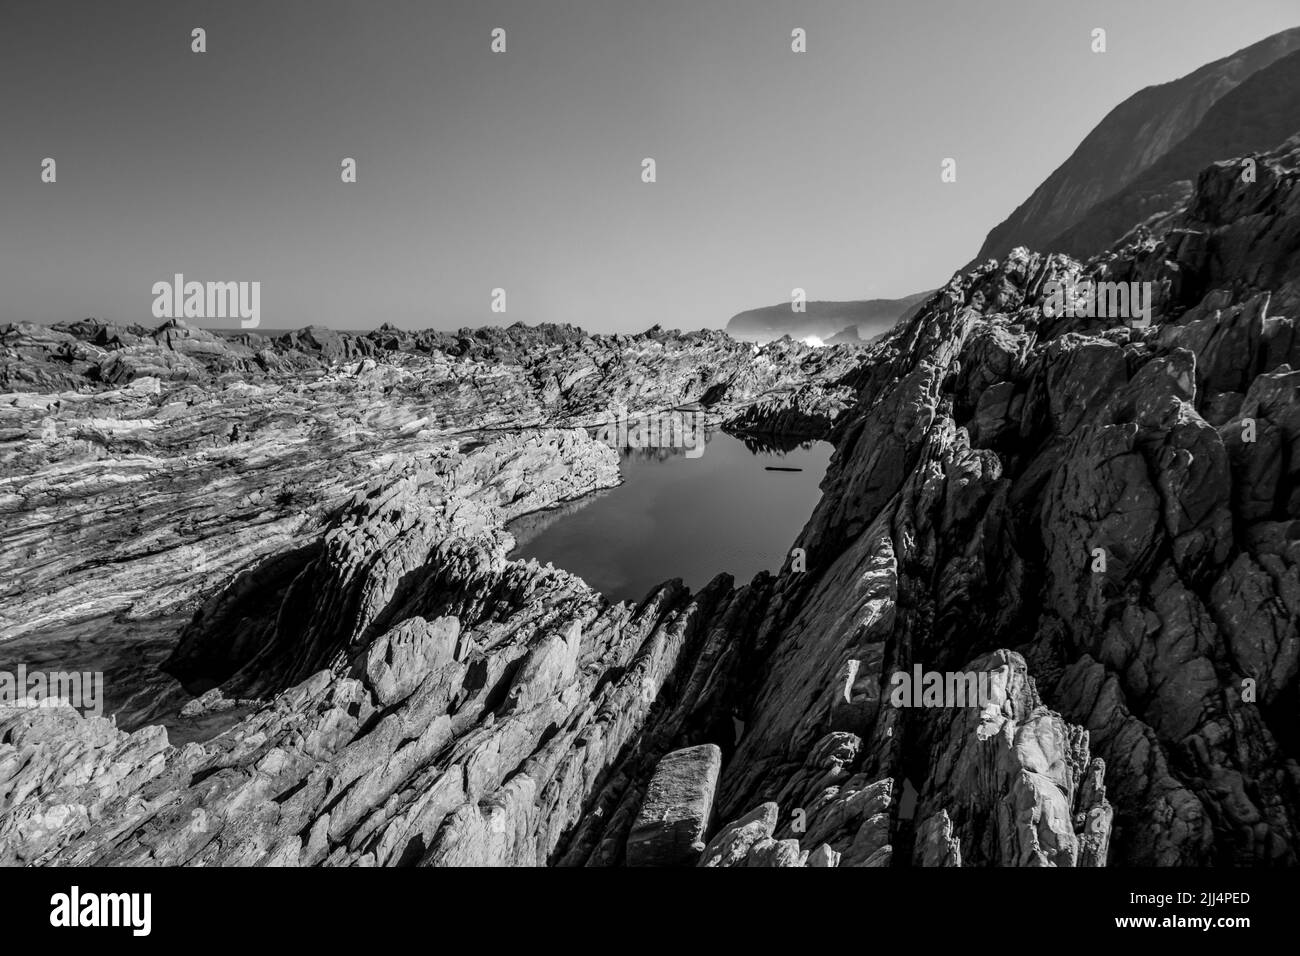 Black and white view of the Looking Jagged Rocky Coastline of the Tsitsikamma section of the Garden Route National Park, South Africa Stock Photo